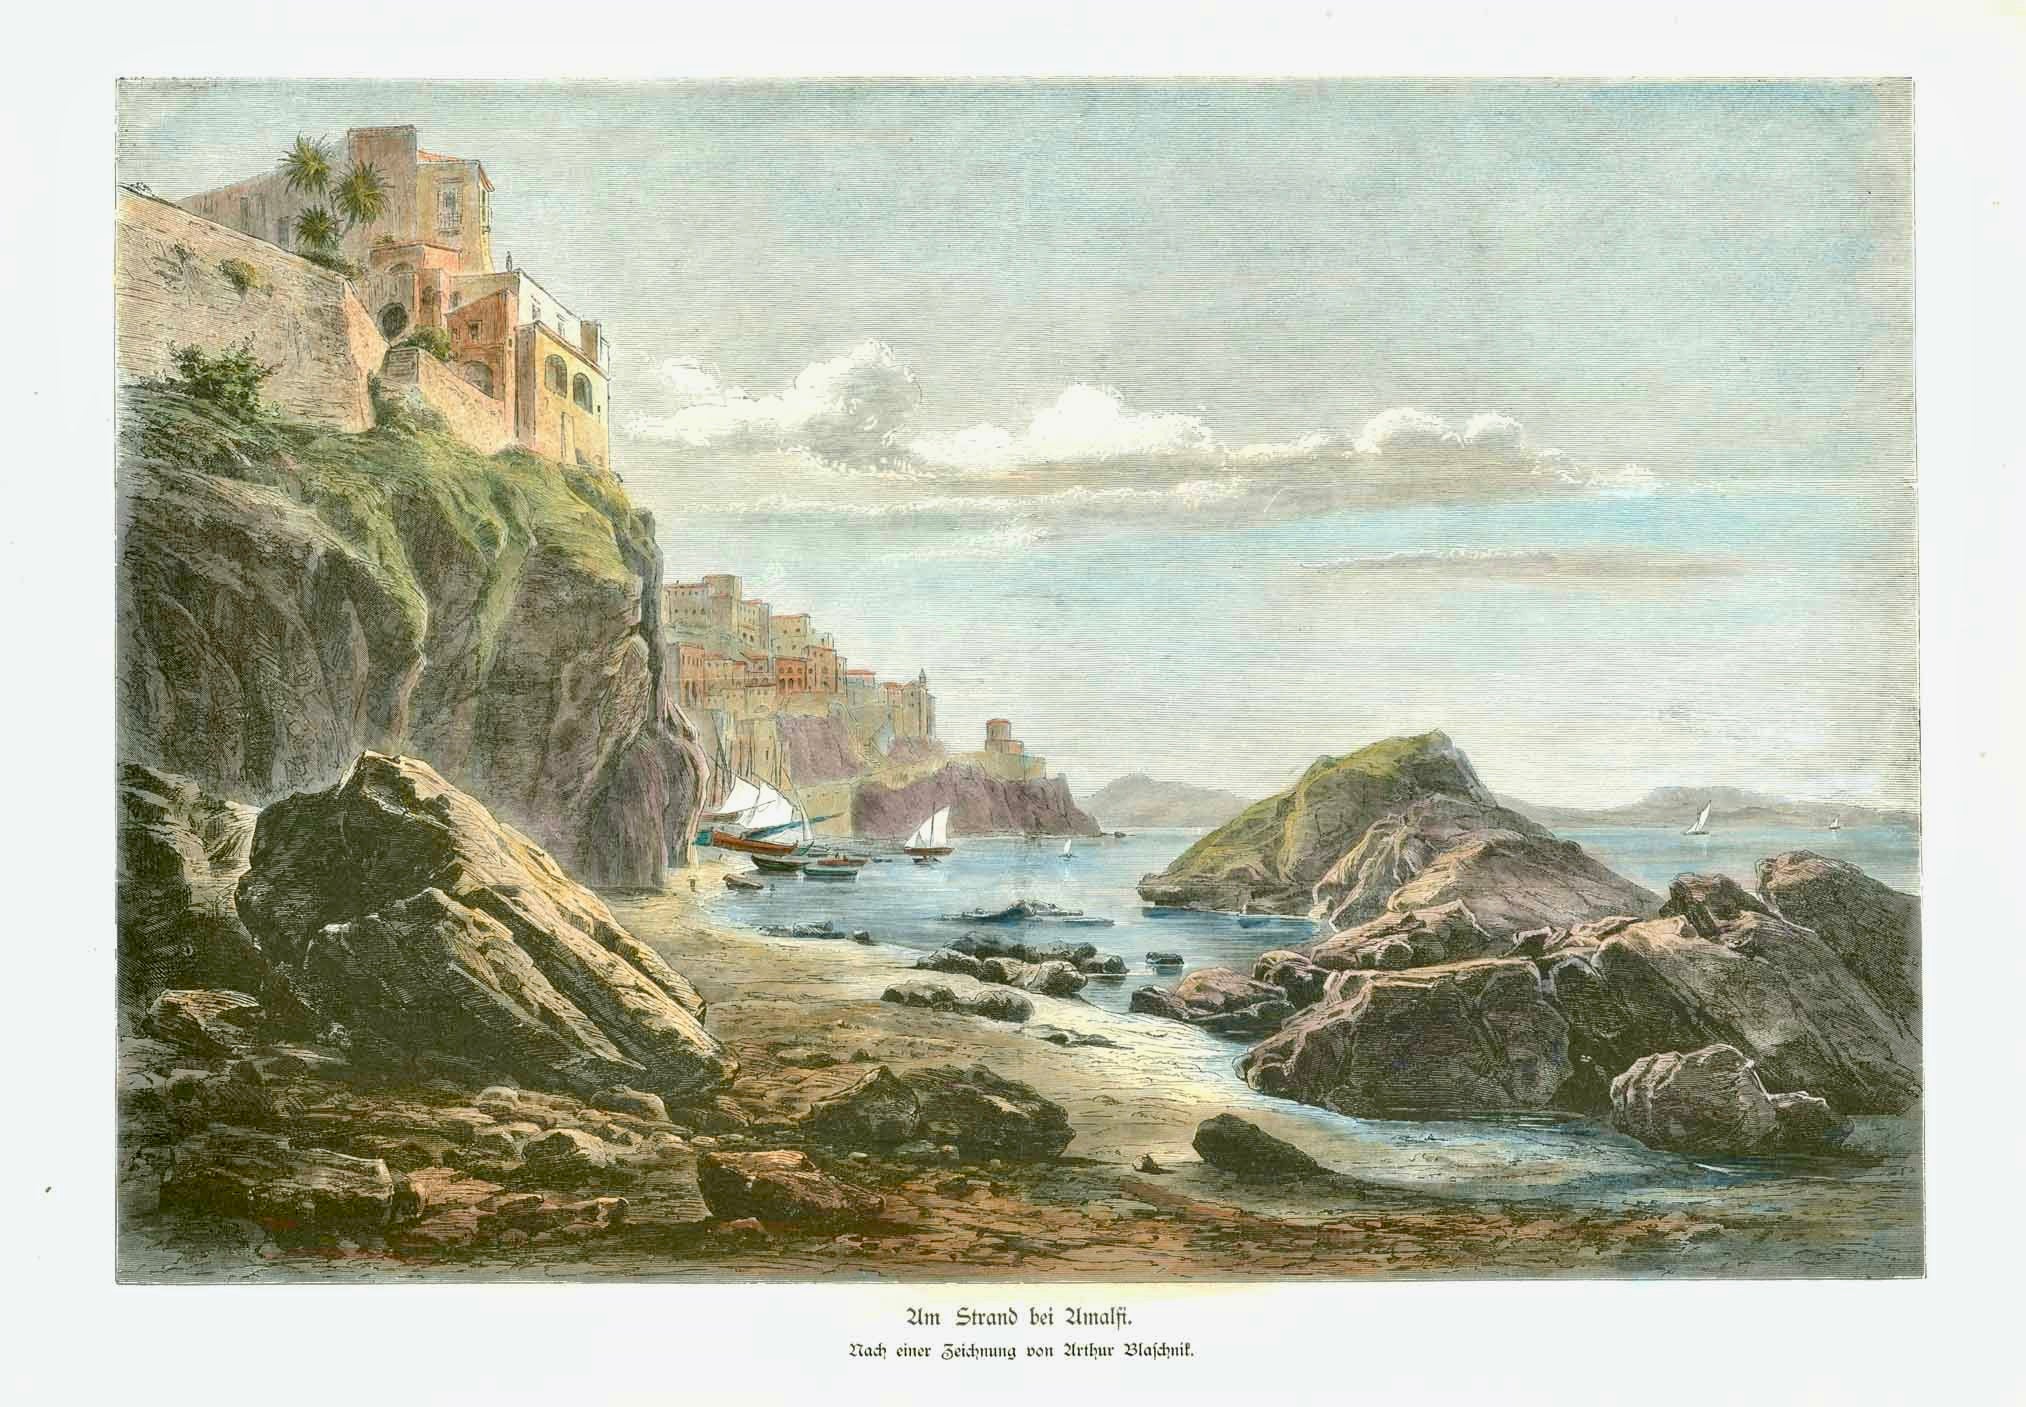 "Am Strand bei Amalfi"  View of the harbor of Amalfi. The town is on the hills above the Golf of Salerno.  Very pleasant view of this world-known Italian town.  Wood engraving made after a drawing by Arthur Blaschnik ( 1821- 1918 ).  Published in Berlin ca 1890.  23.3 x 35 cm ( 9.1 x 13.7 ")